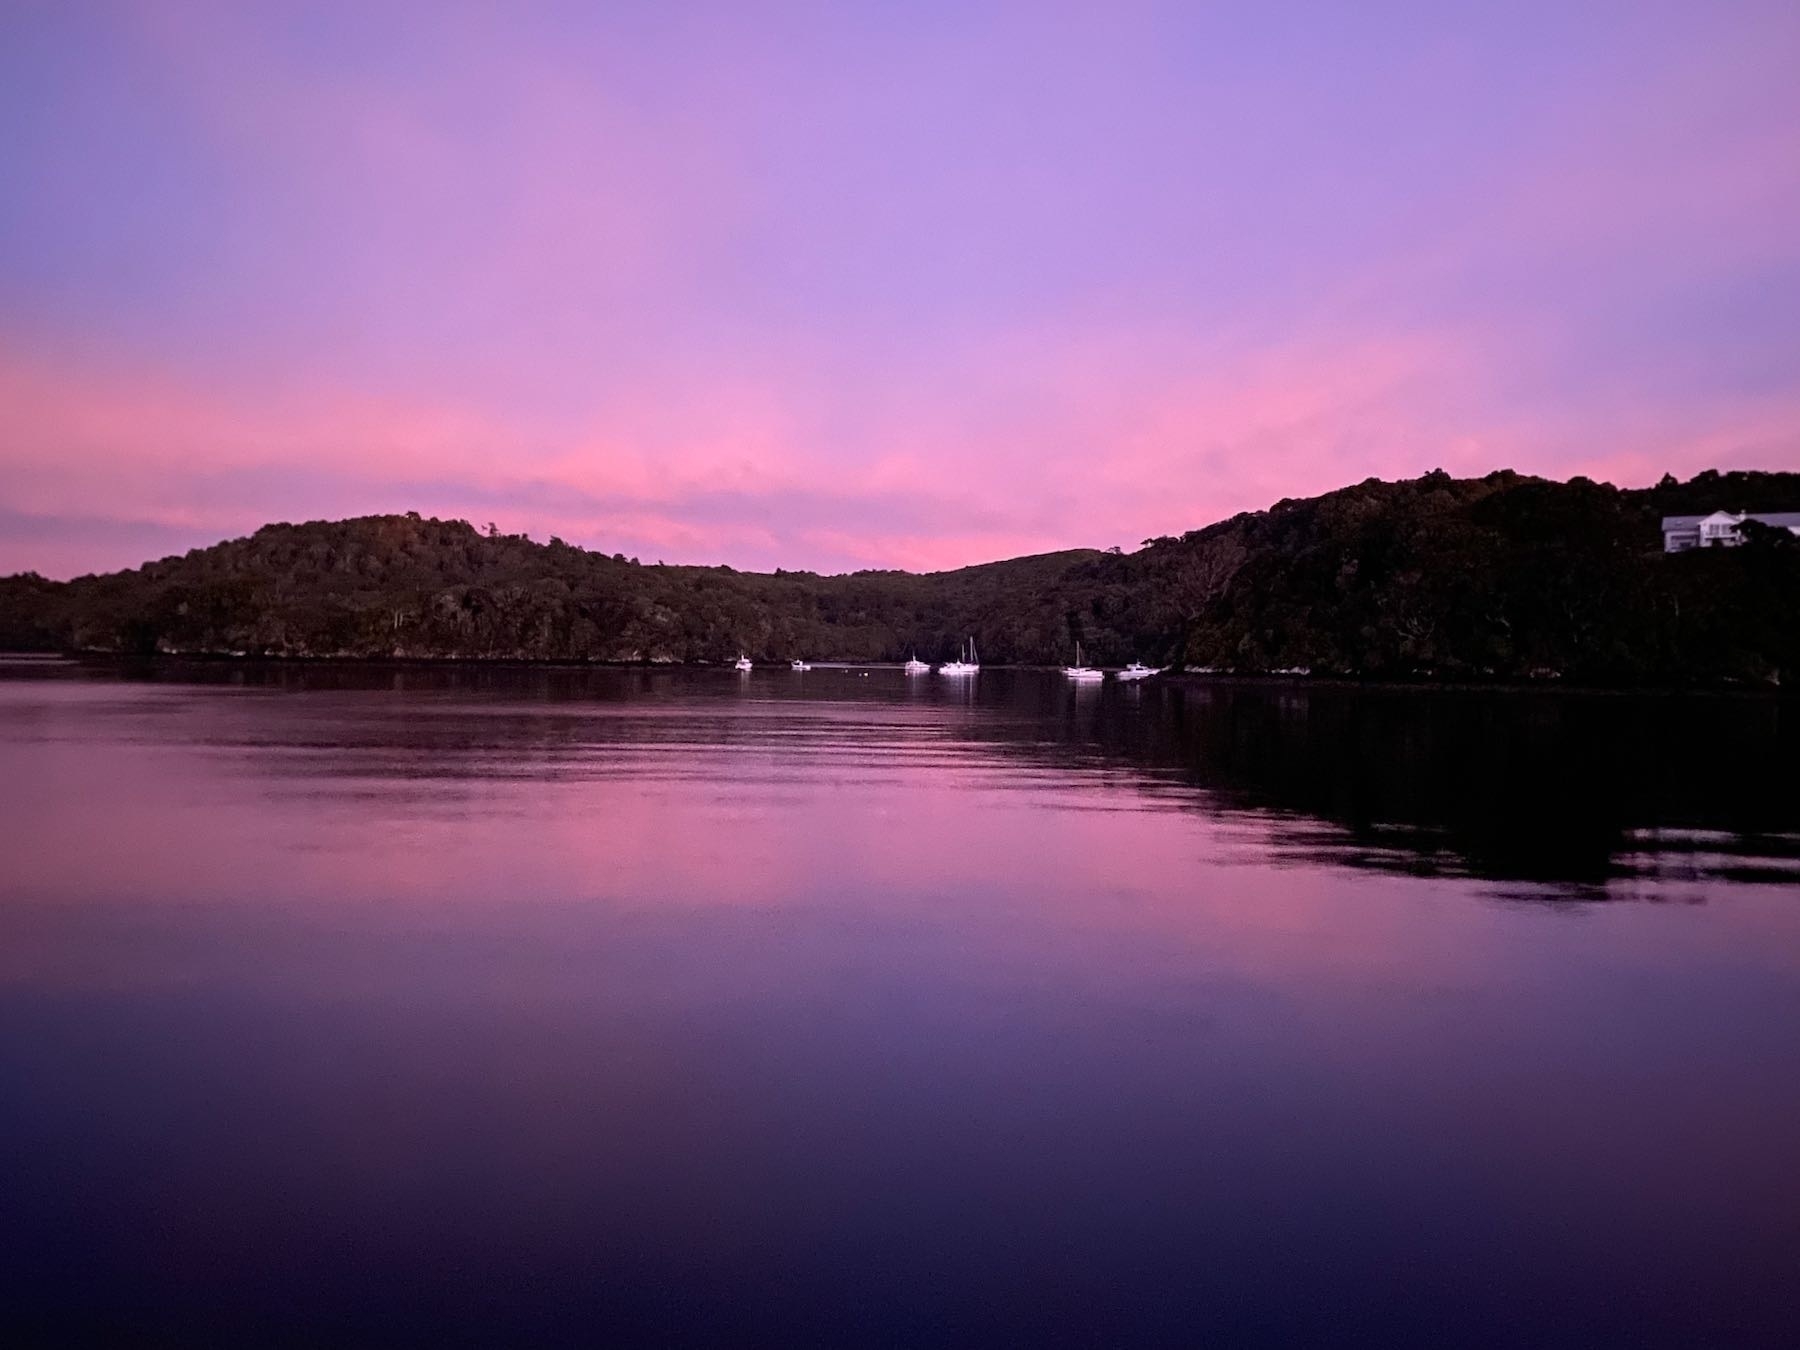 Water of a bay with boats, hills behind and a purple sunrise. 